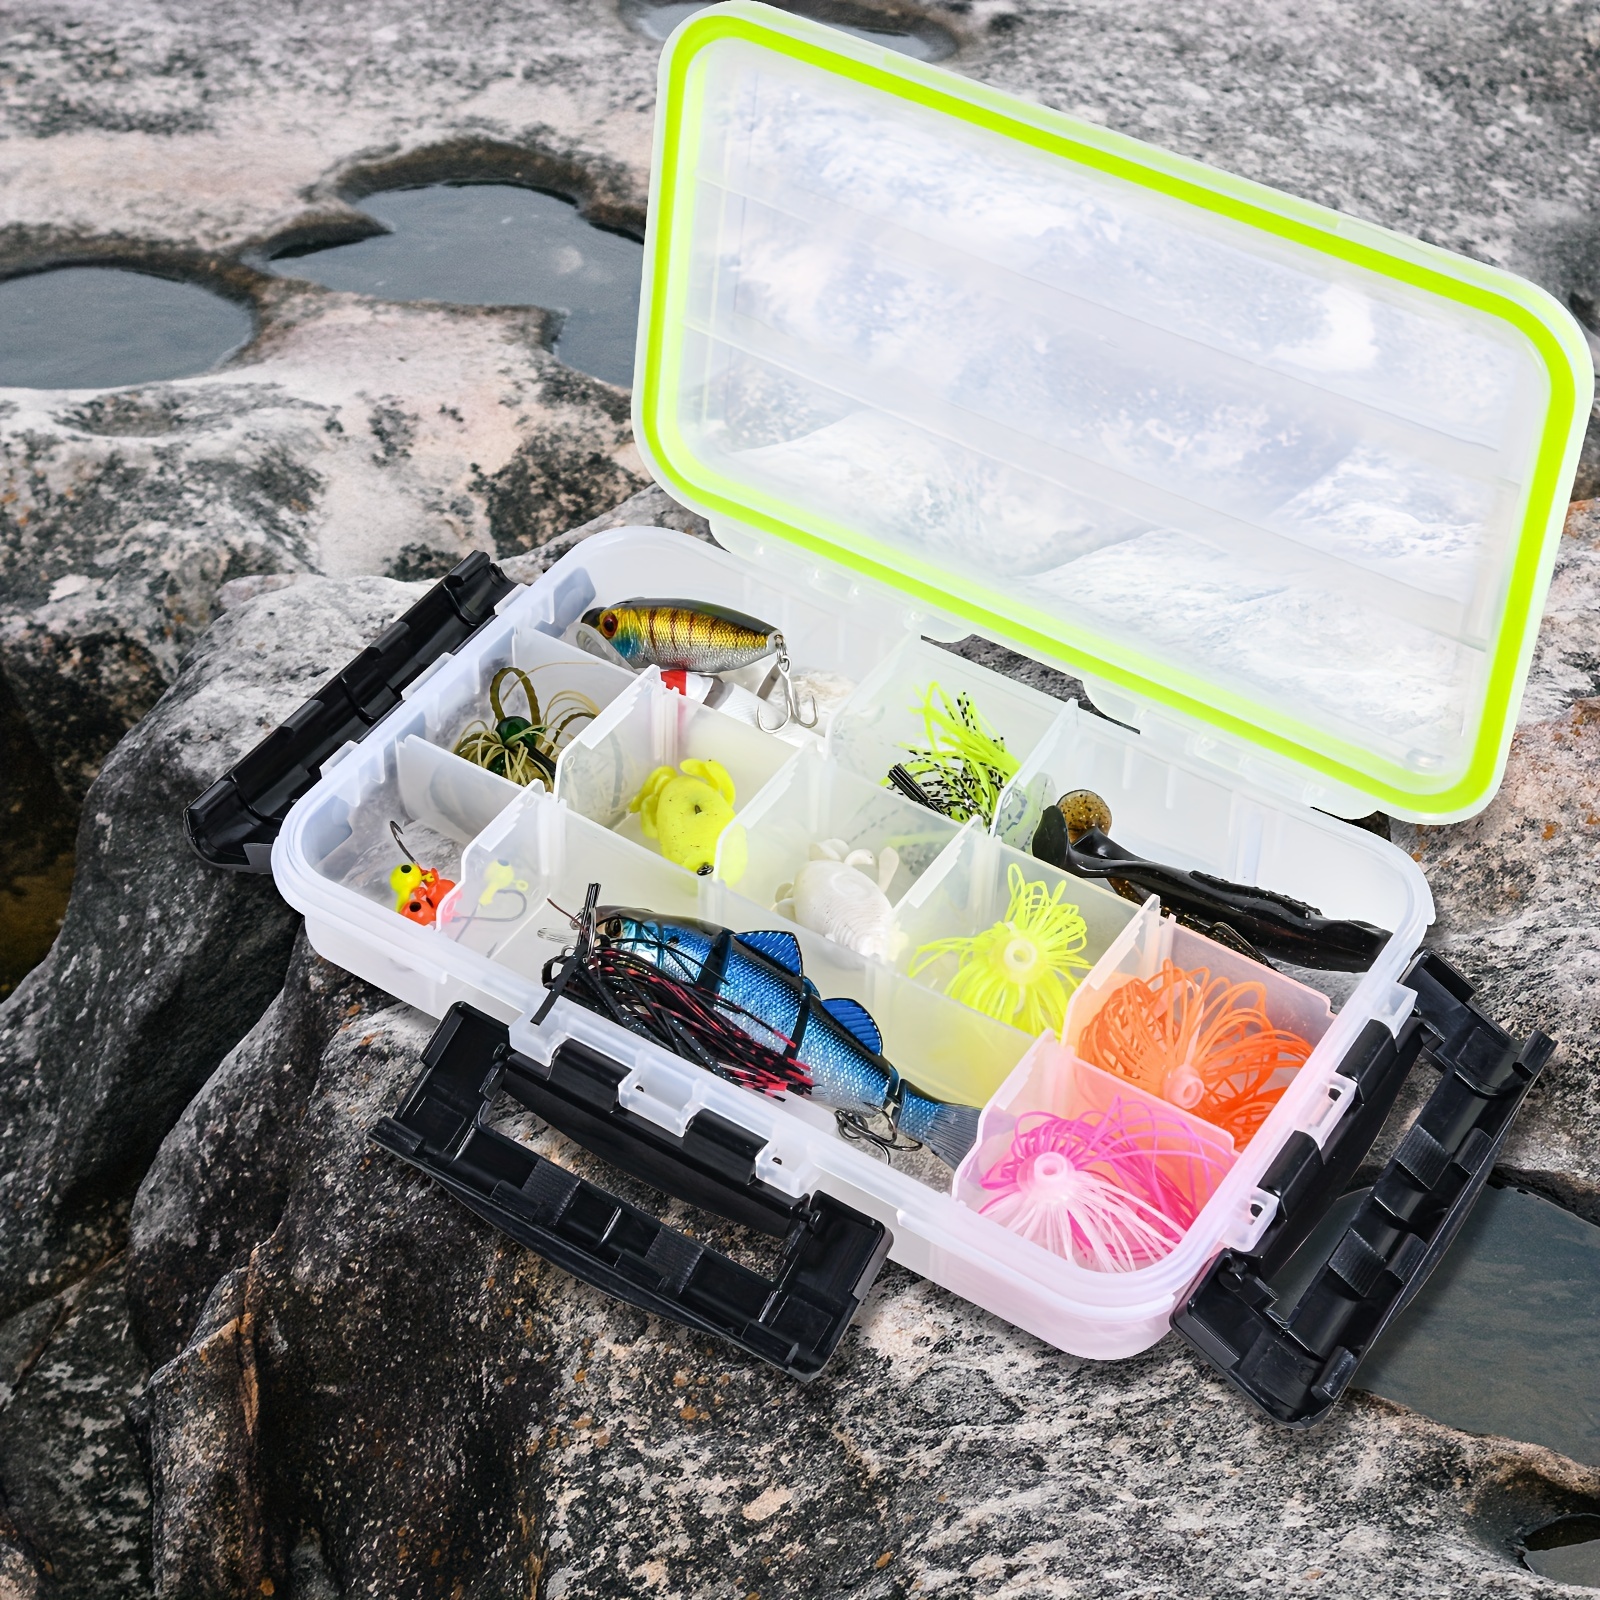 Goture 2Pcs 3700 Tackle Tray, Waterproof Tackle Box, Waterproof Floating  Airtight Stowaway, 3700 Tray with Adjustable Dividers, Sun Protection